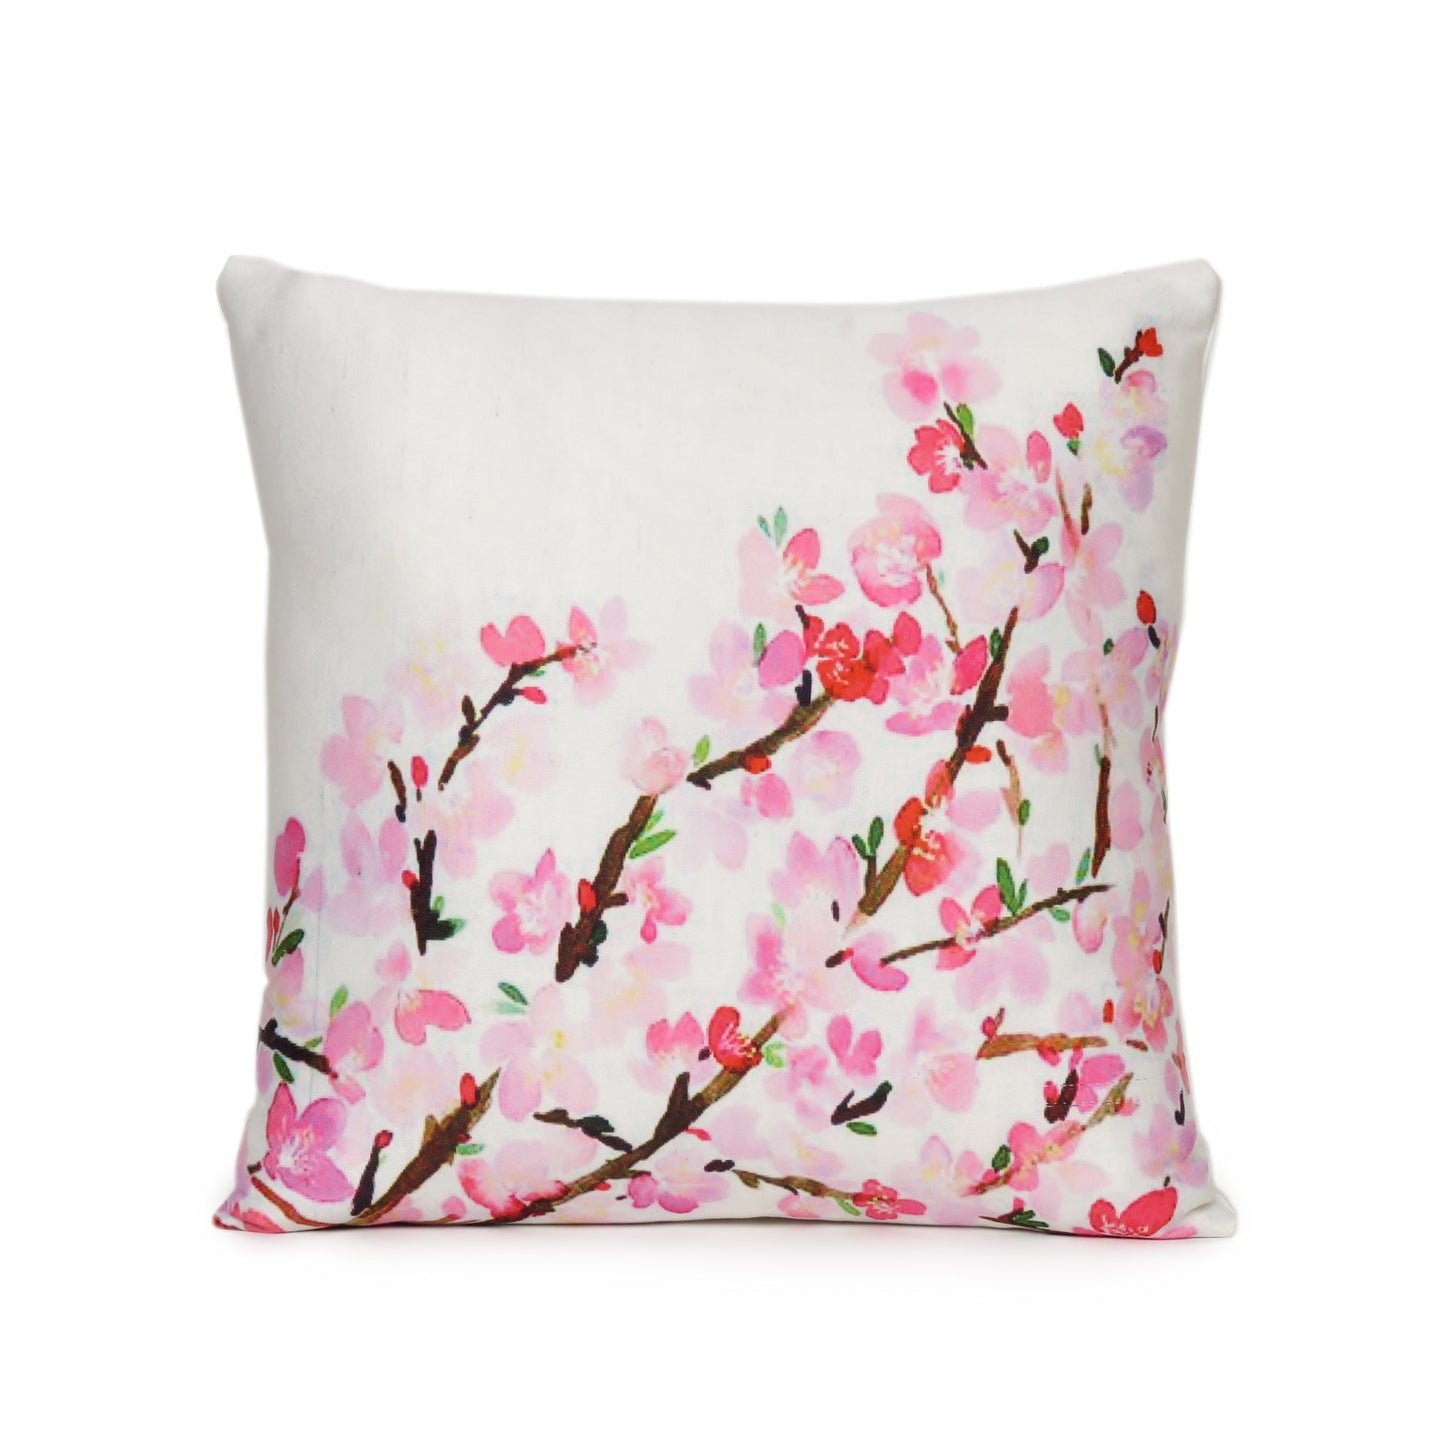 Pink Floral Printed Cushion Cover in Set of 2